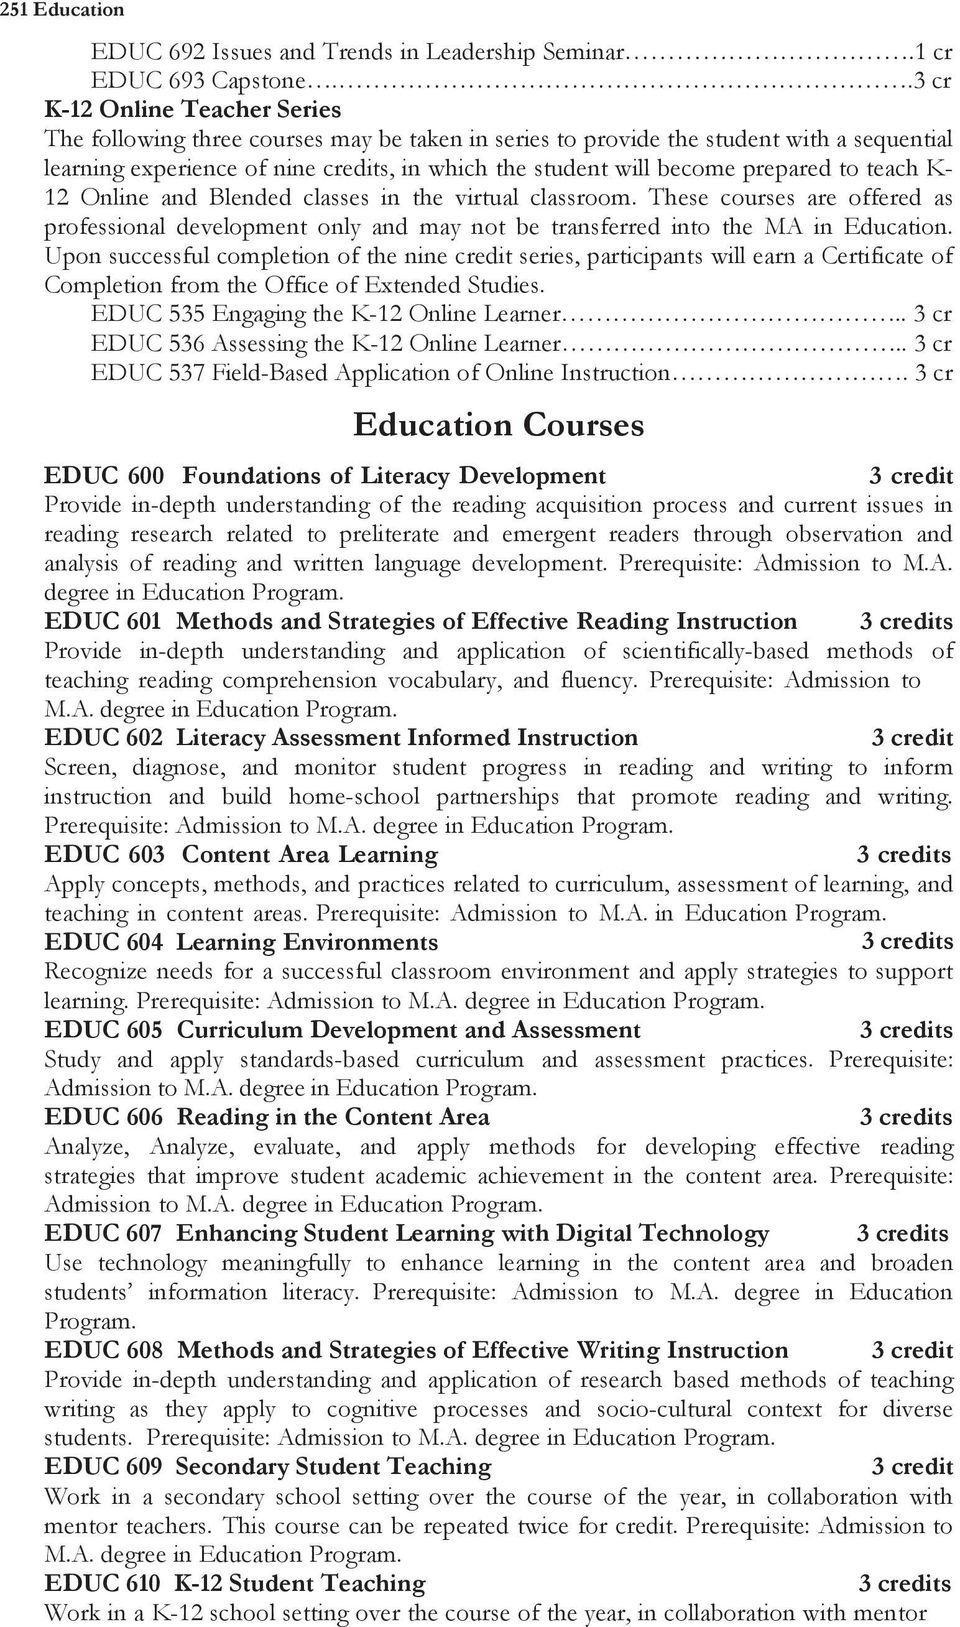 prepared to teach K- 12 Online and Blended classes in the virtual classroom. These courses are offered as professional development only and may not be transferred into the MA in Education.